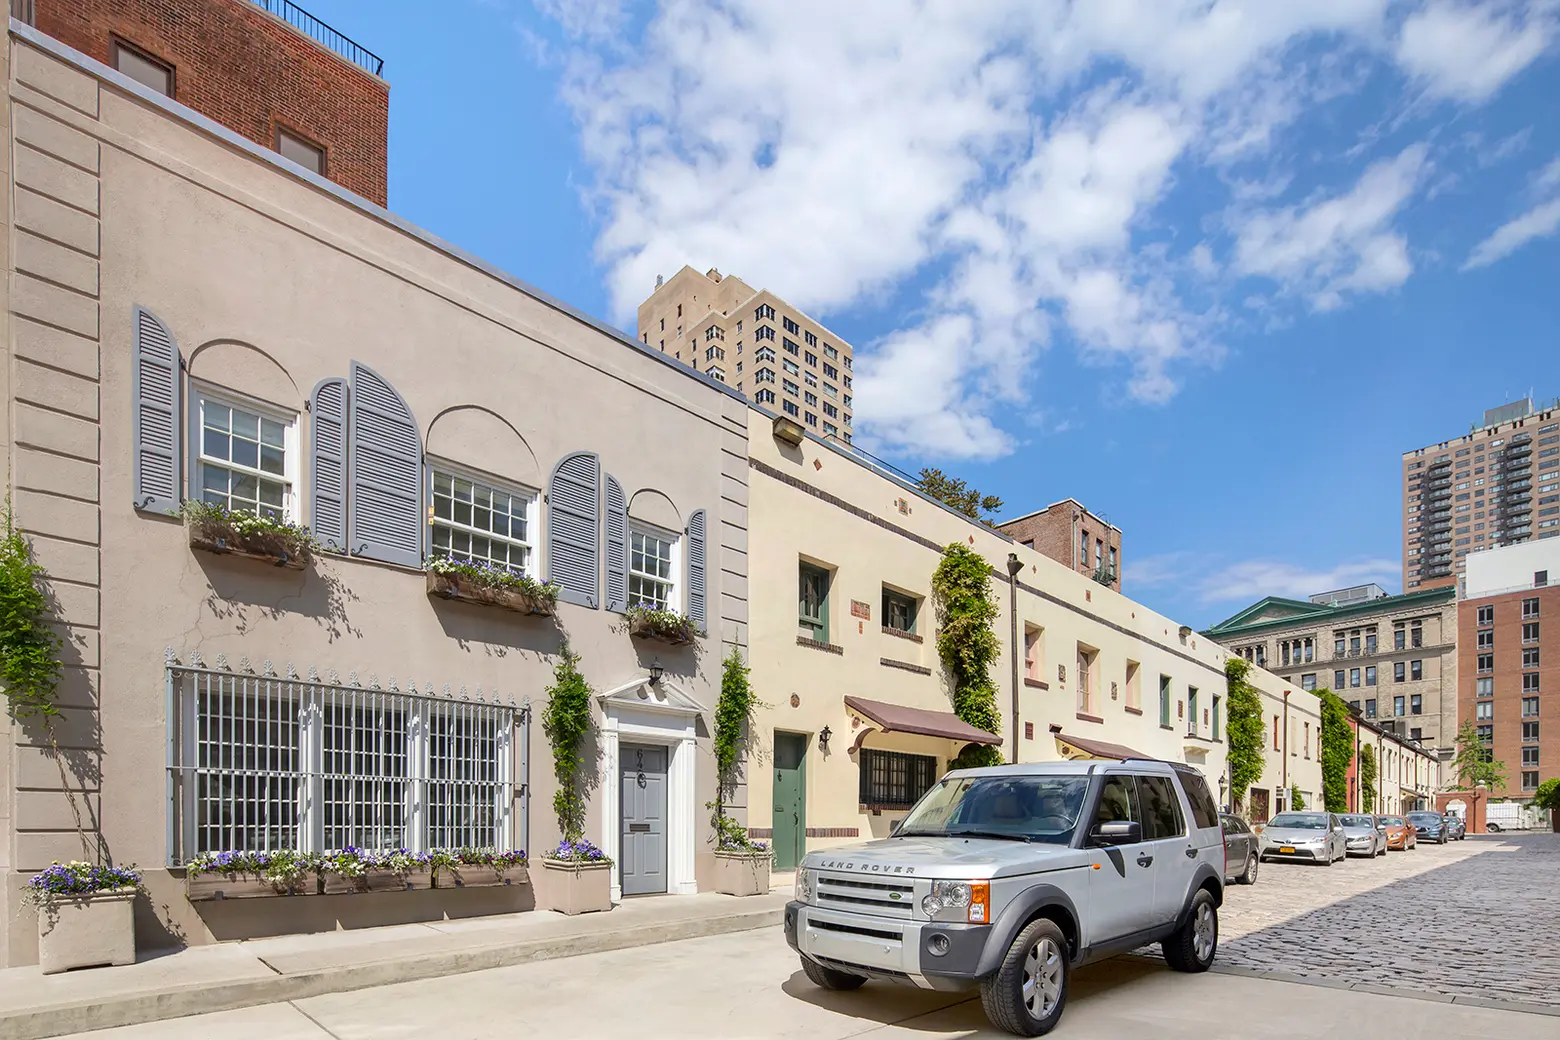 Rent a Former Carriage House in the Historic Washington Mews for $30K/Month